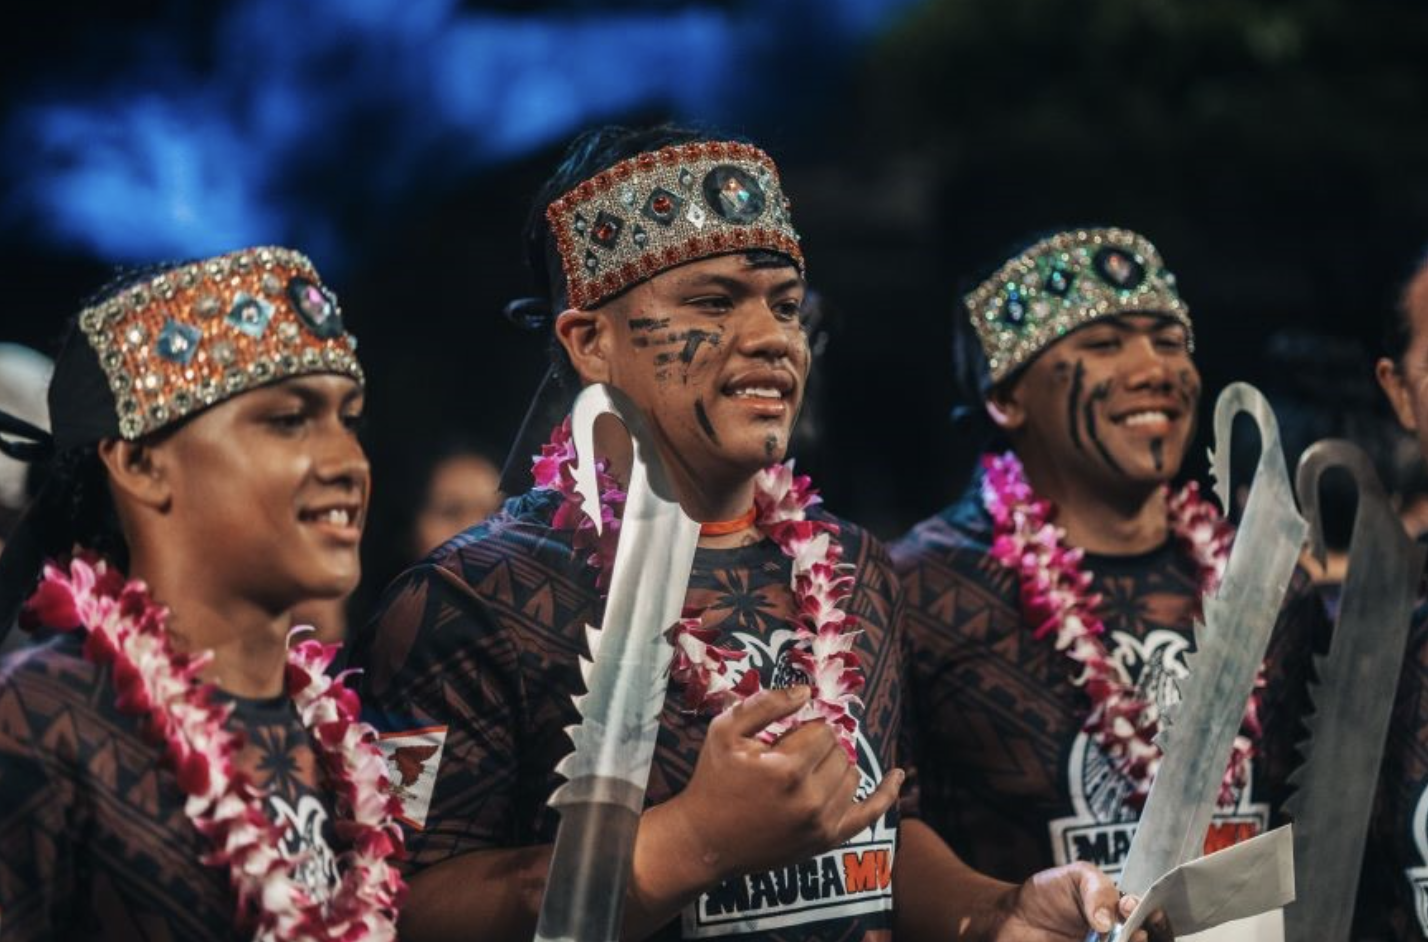 Mamalu Lilo (left), Mose Lilo (middle), and Matagi Lilo (right) pose with their prizes.